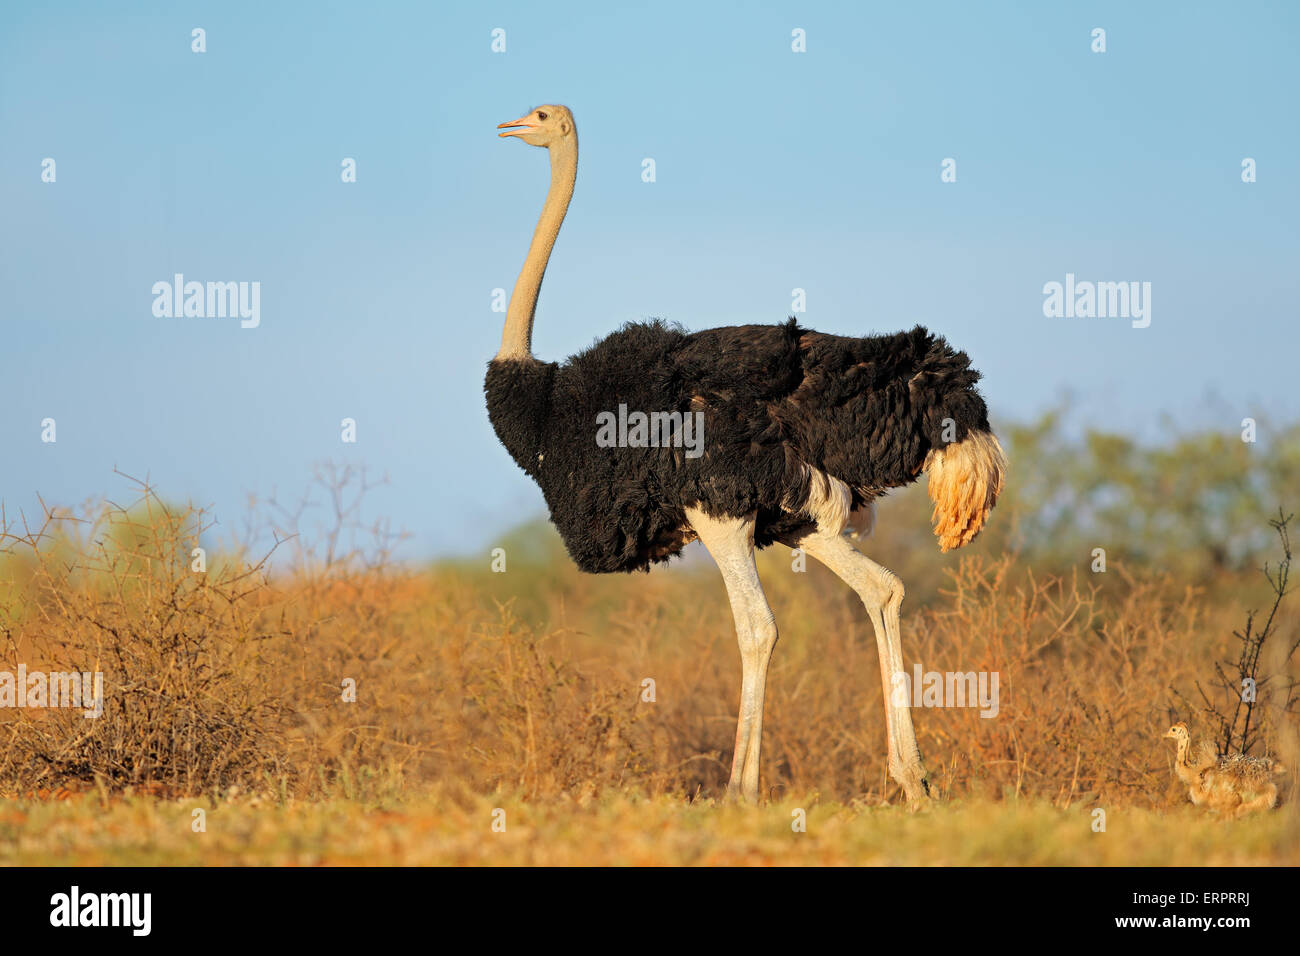 Male ostrich (Struthio camelus) with chicks, Kalahari desert, South Africa Stock Photo